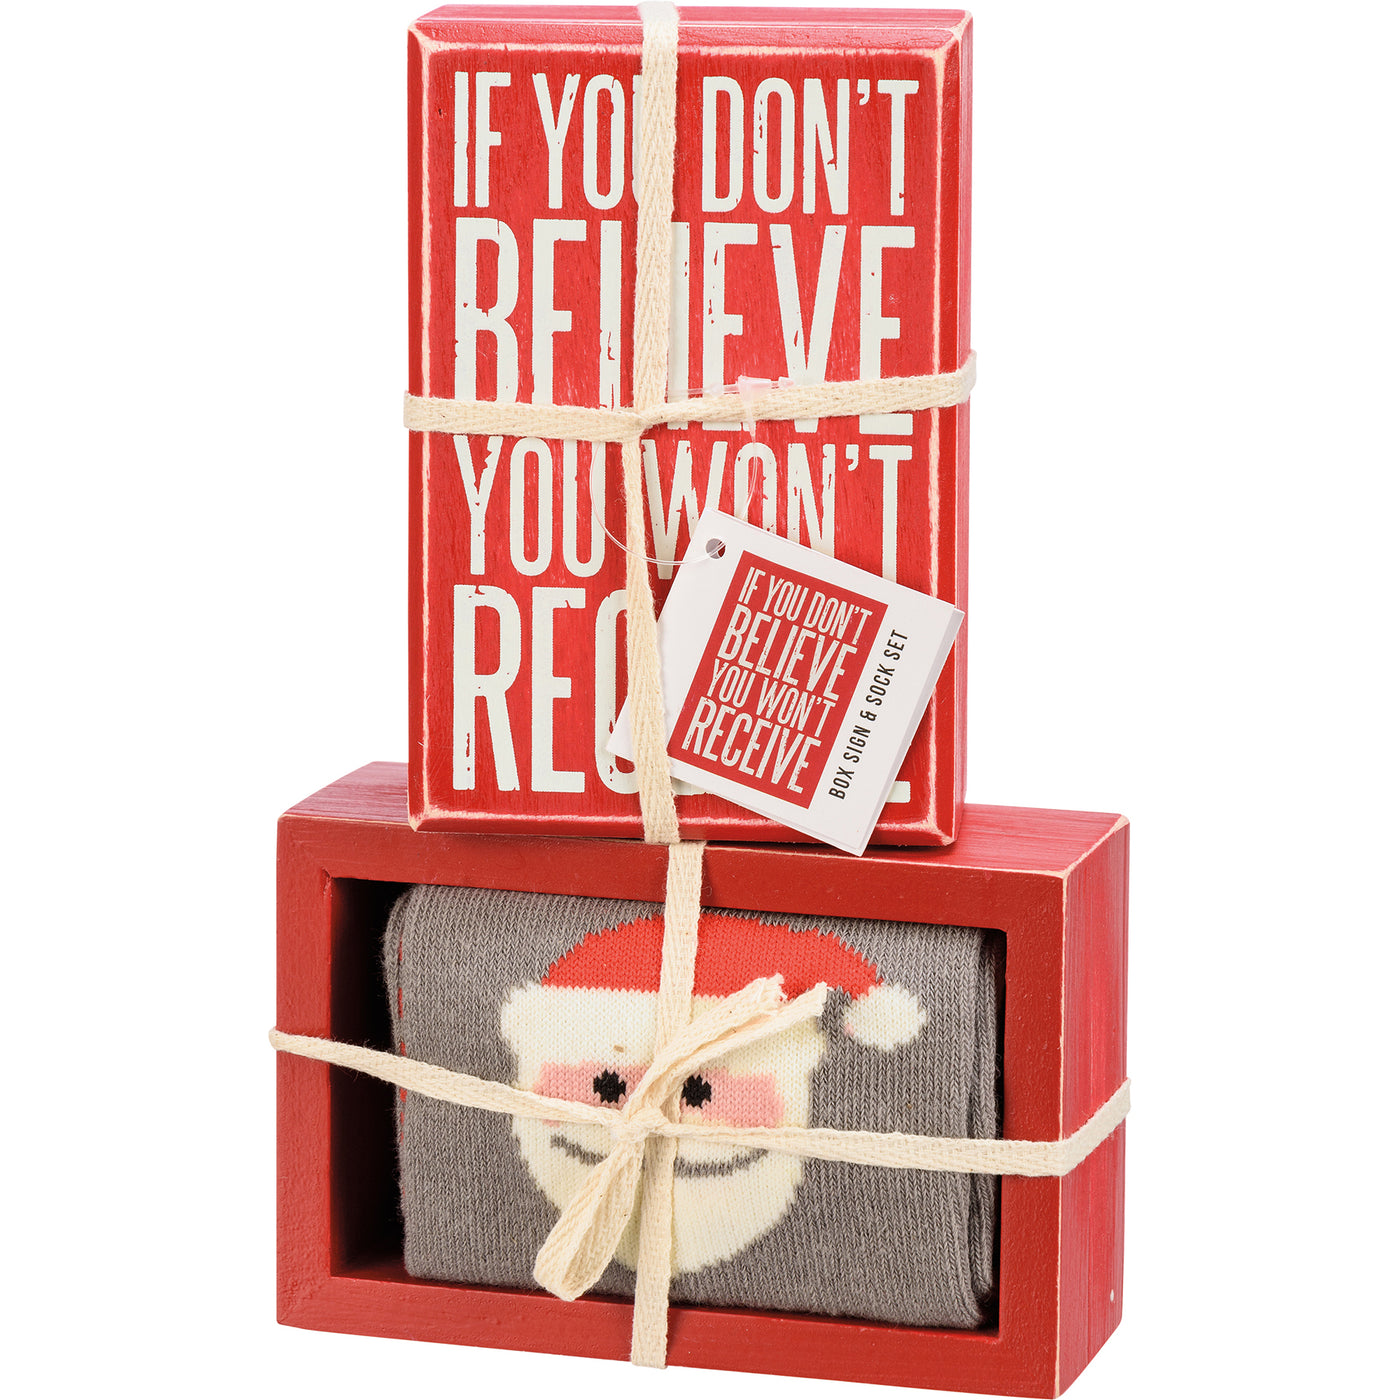 If You Don't Believe You Won't Receive Santa Box Sign & Sock Set